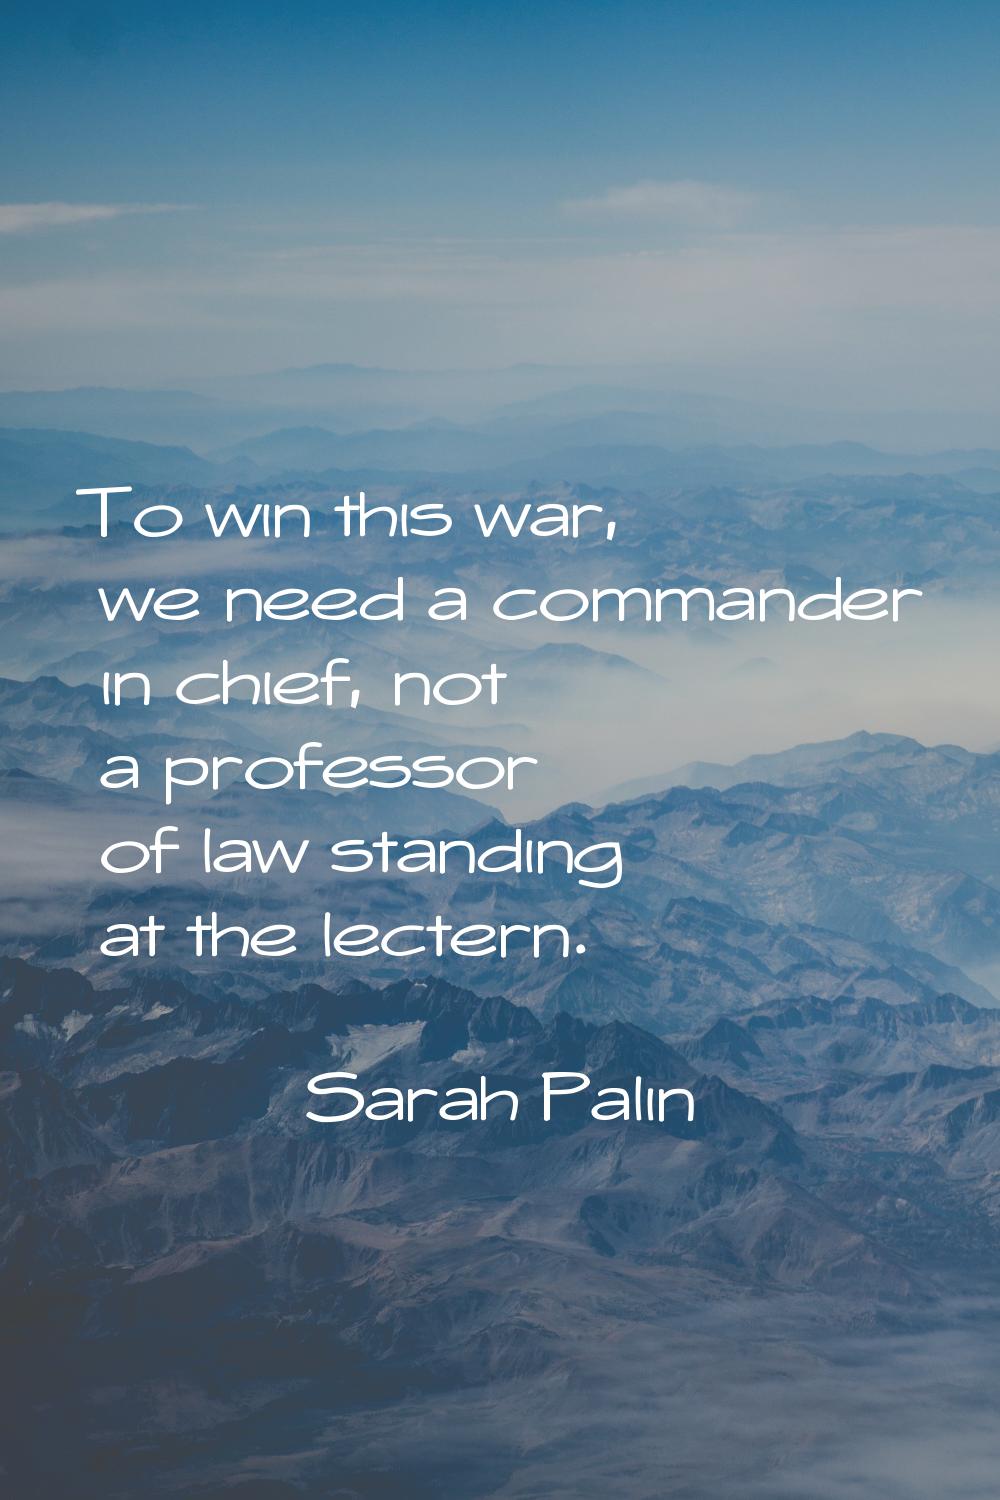 To win this war, we need a commander in chief, not a professor of law standing at the lectern.